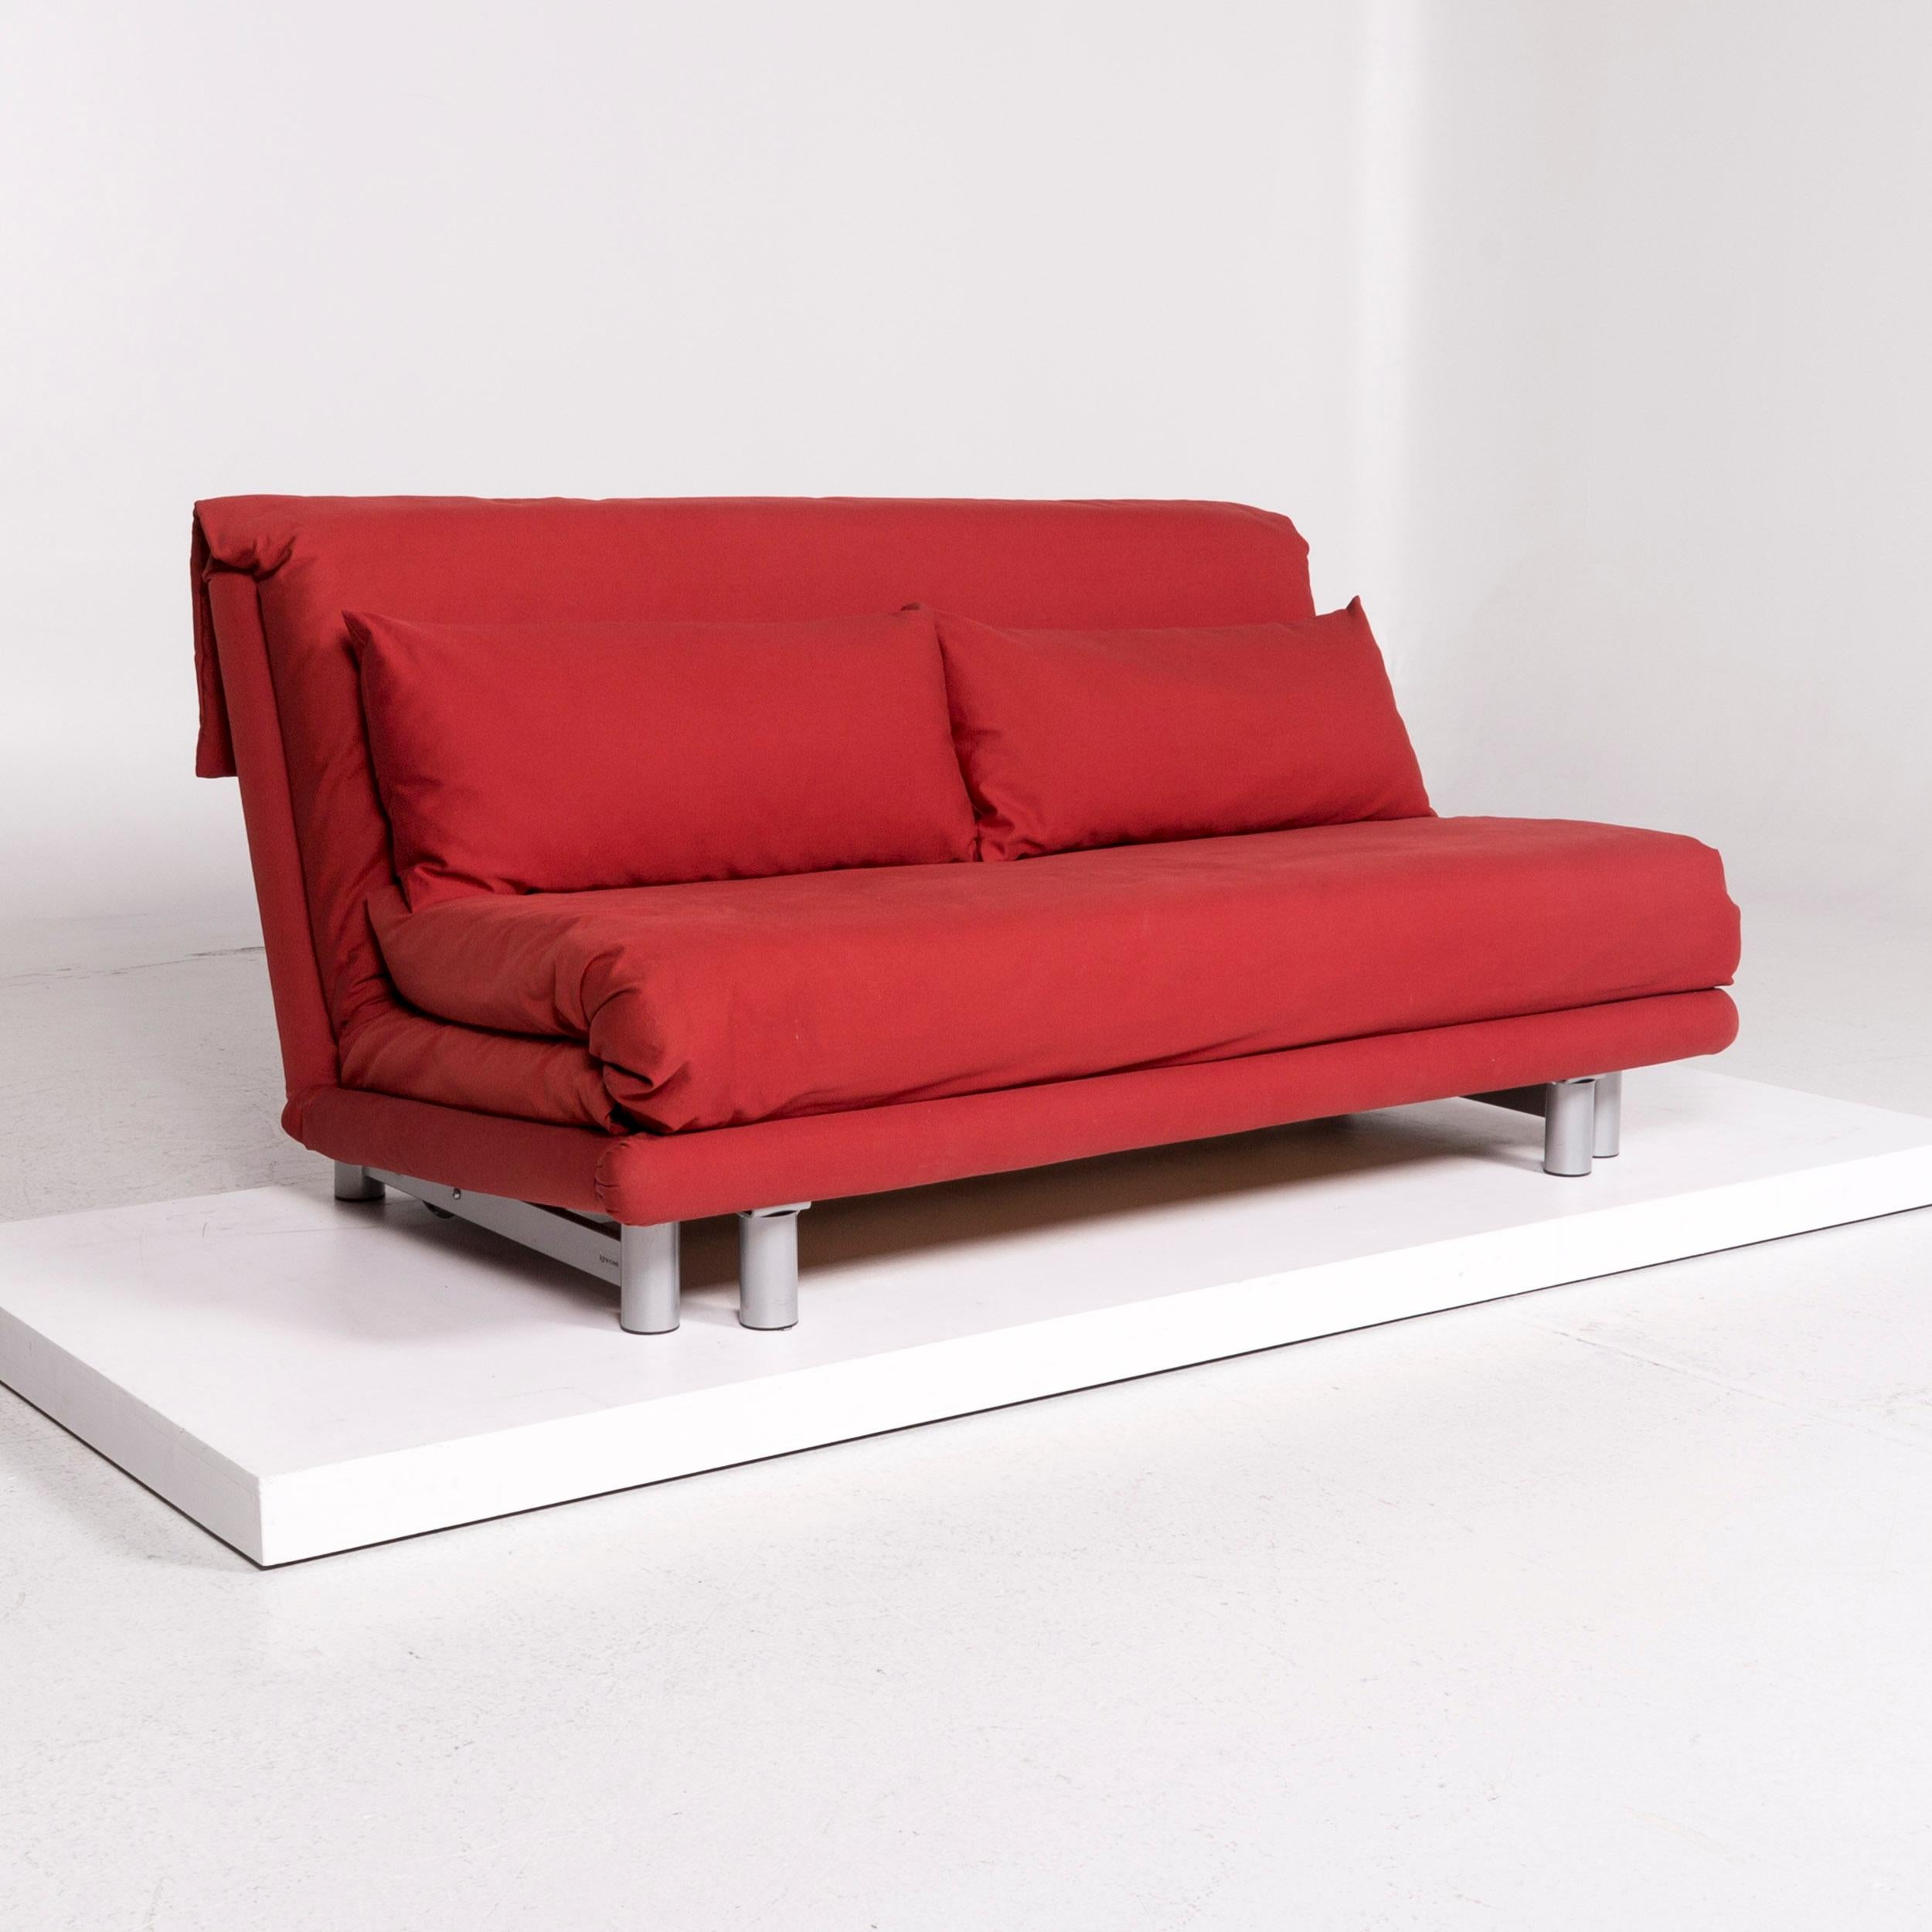 We bring to you a Ligne Roset multy fabric sofa bed red sofa sleep function couch.
   
 

Product measurements in centimetres:
 

Depth 101
Width 166
Height 81
Seat-height 41
Seat-depth 66
Seat-width 166
Back-height 40.
  